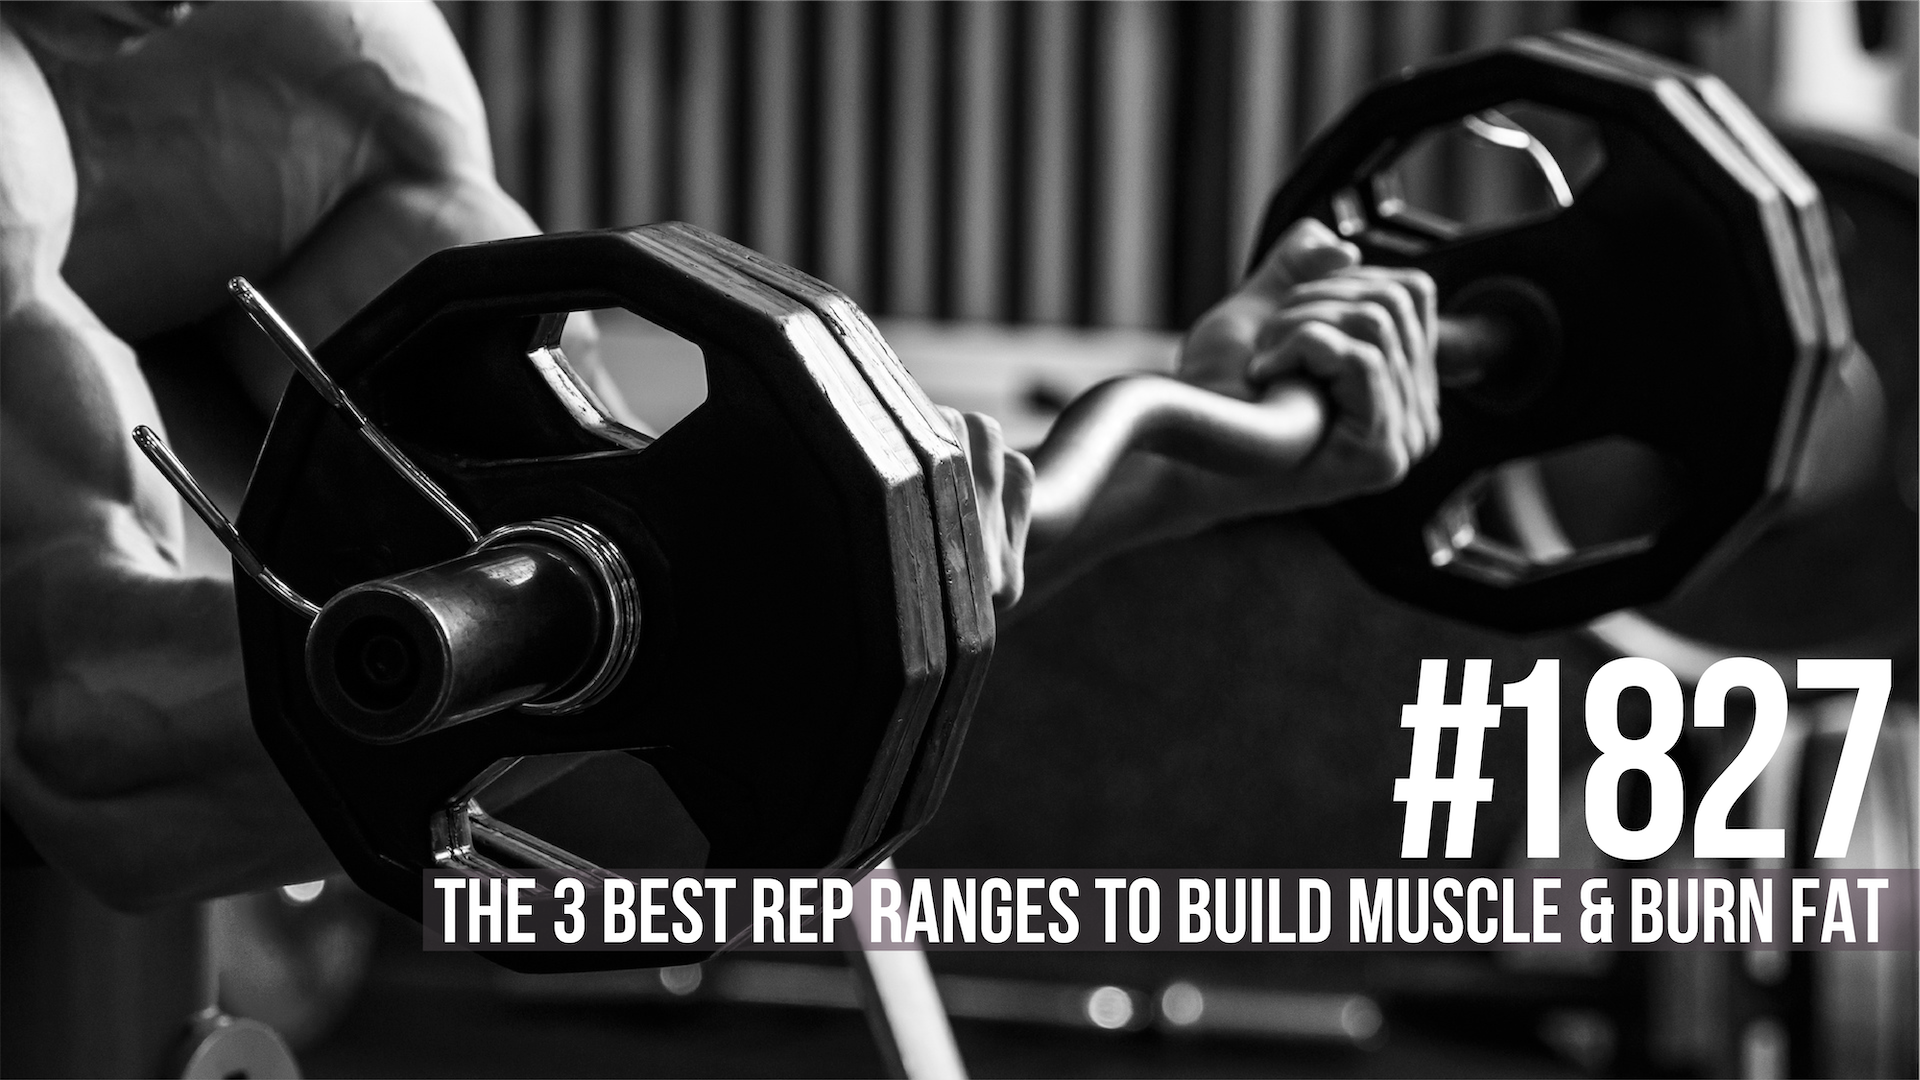 1827: The 3 Best Rep Ranges to Build Muscle & Burn Fat